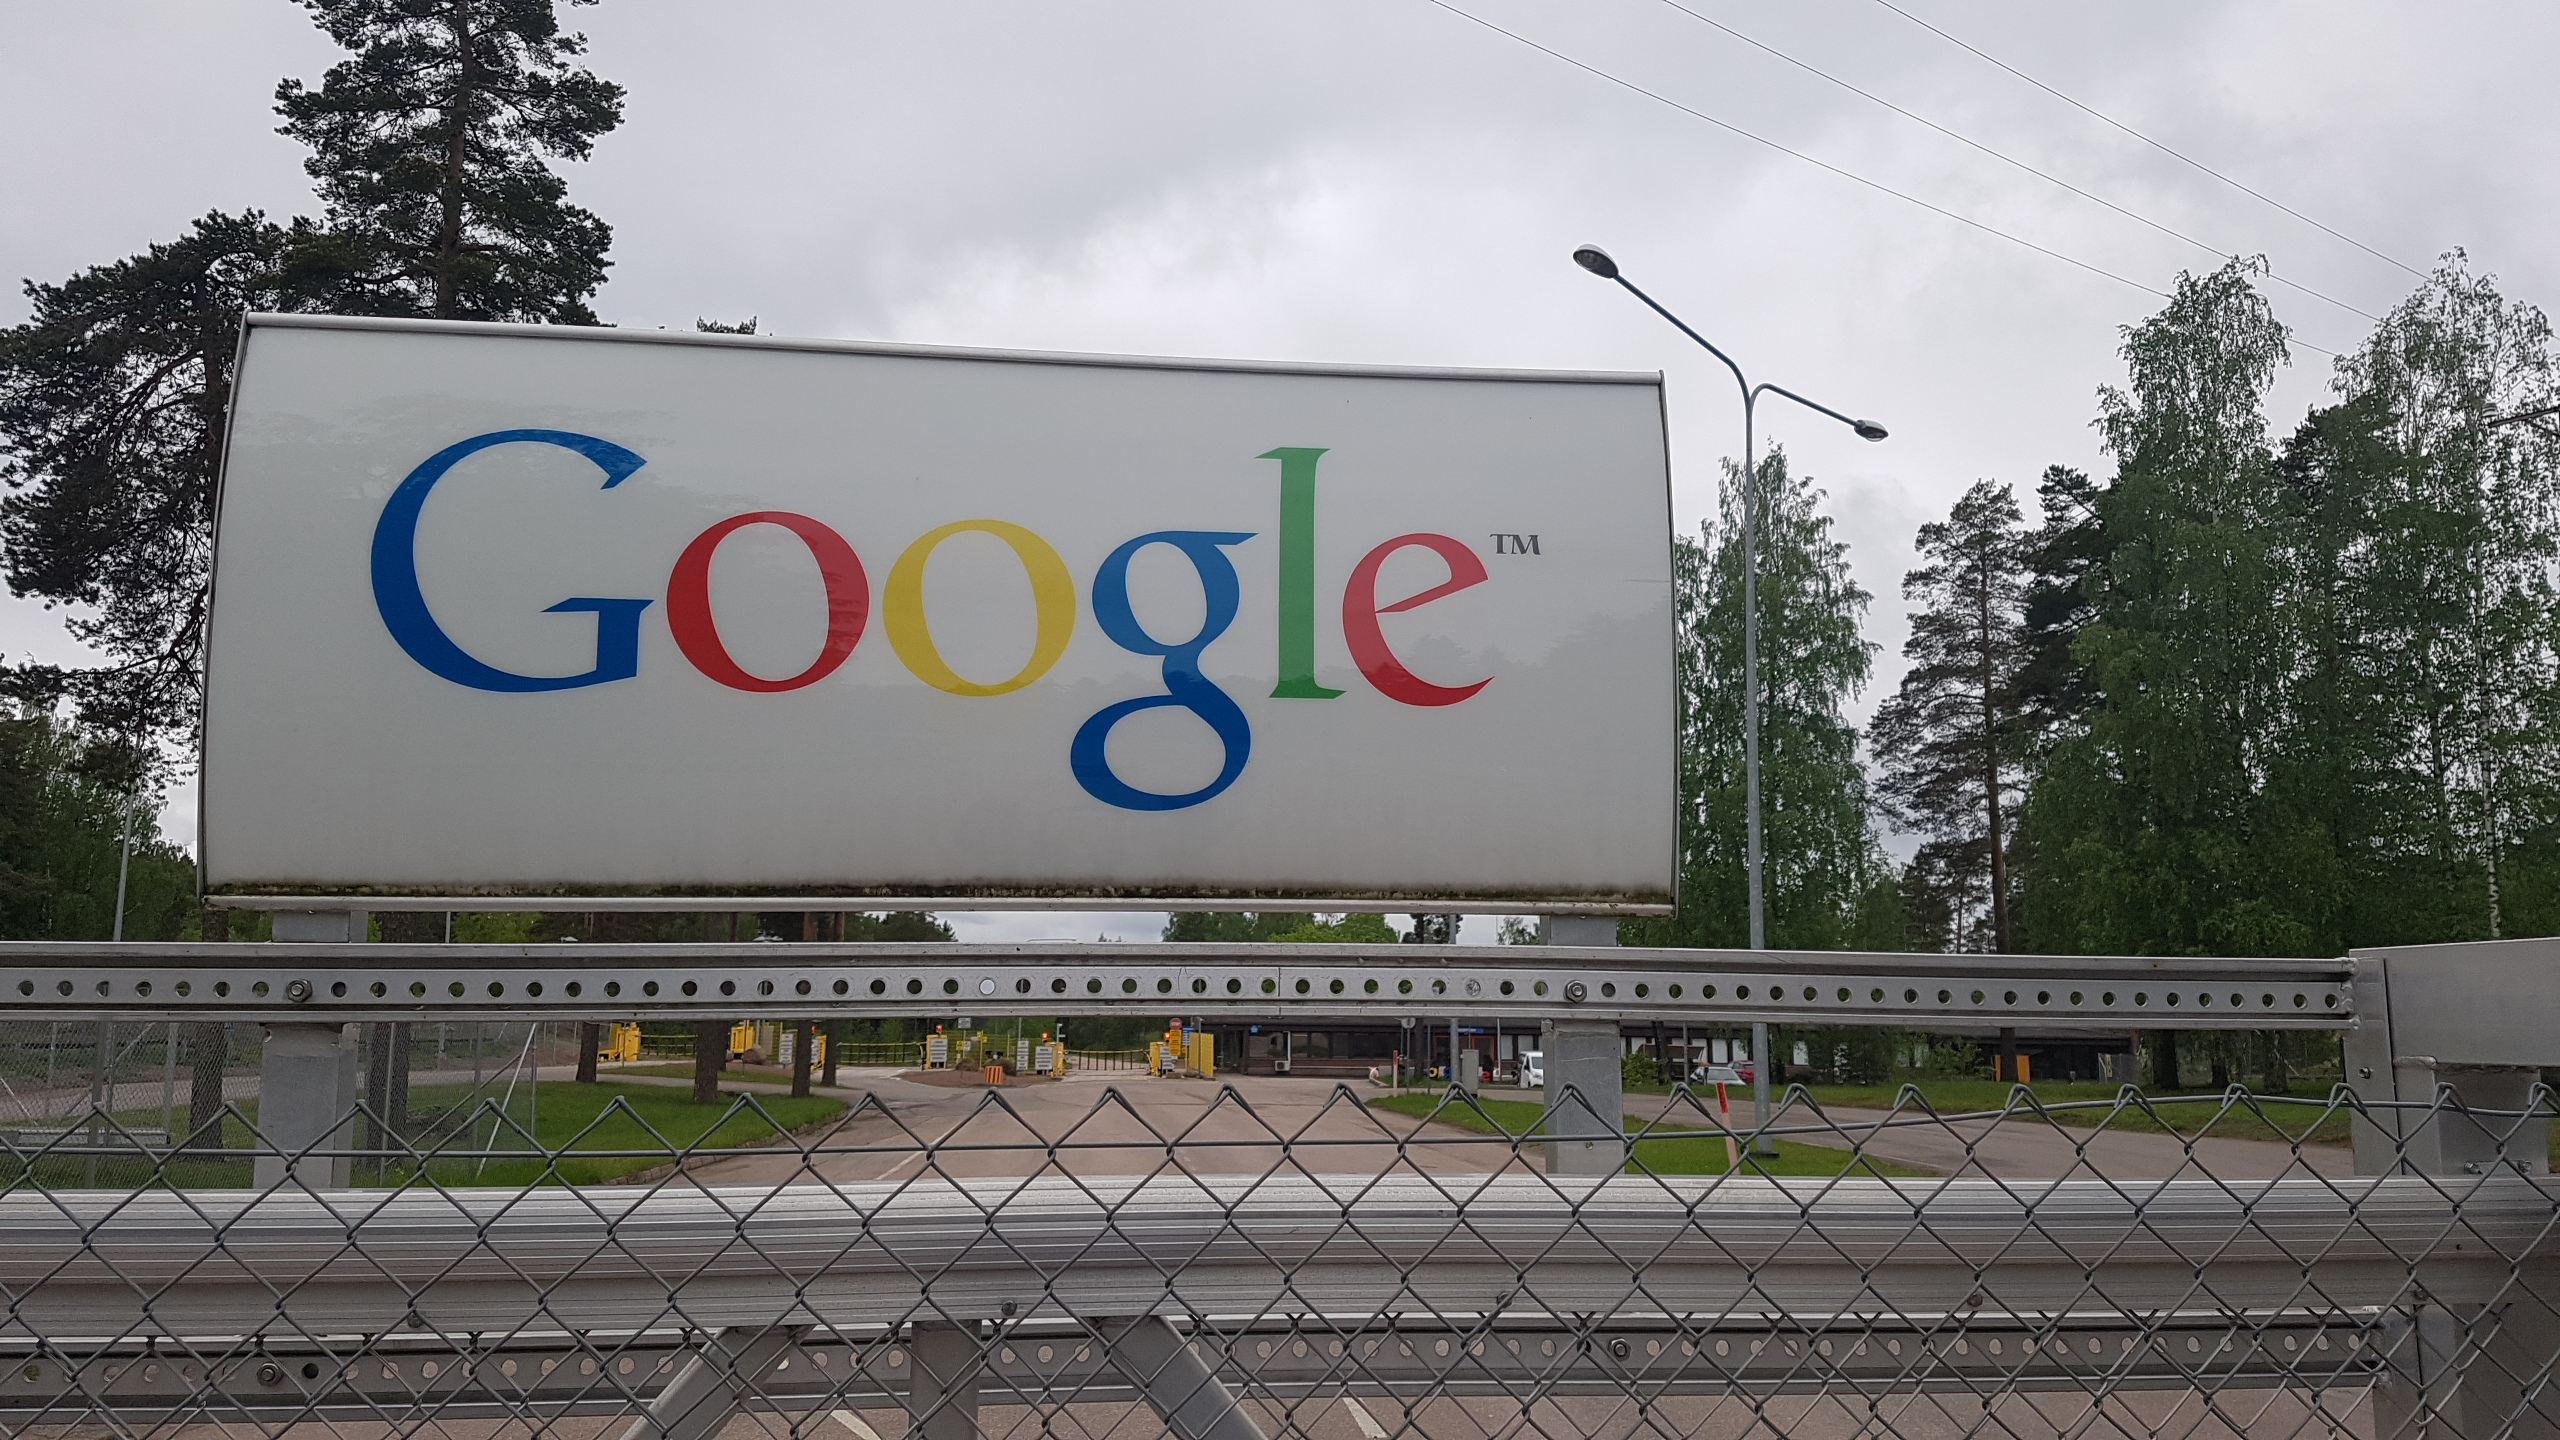 Google to open sixth data center in Hamina next year, workforce to 400